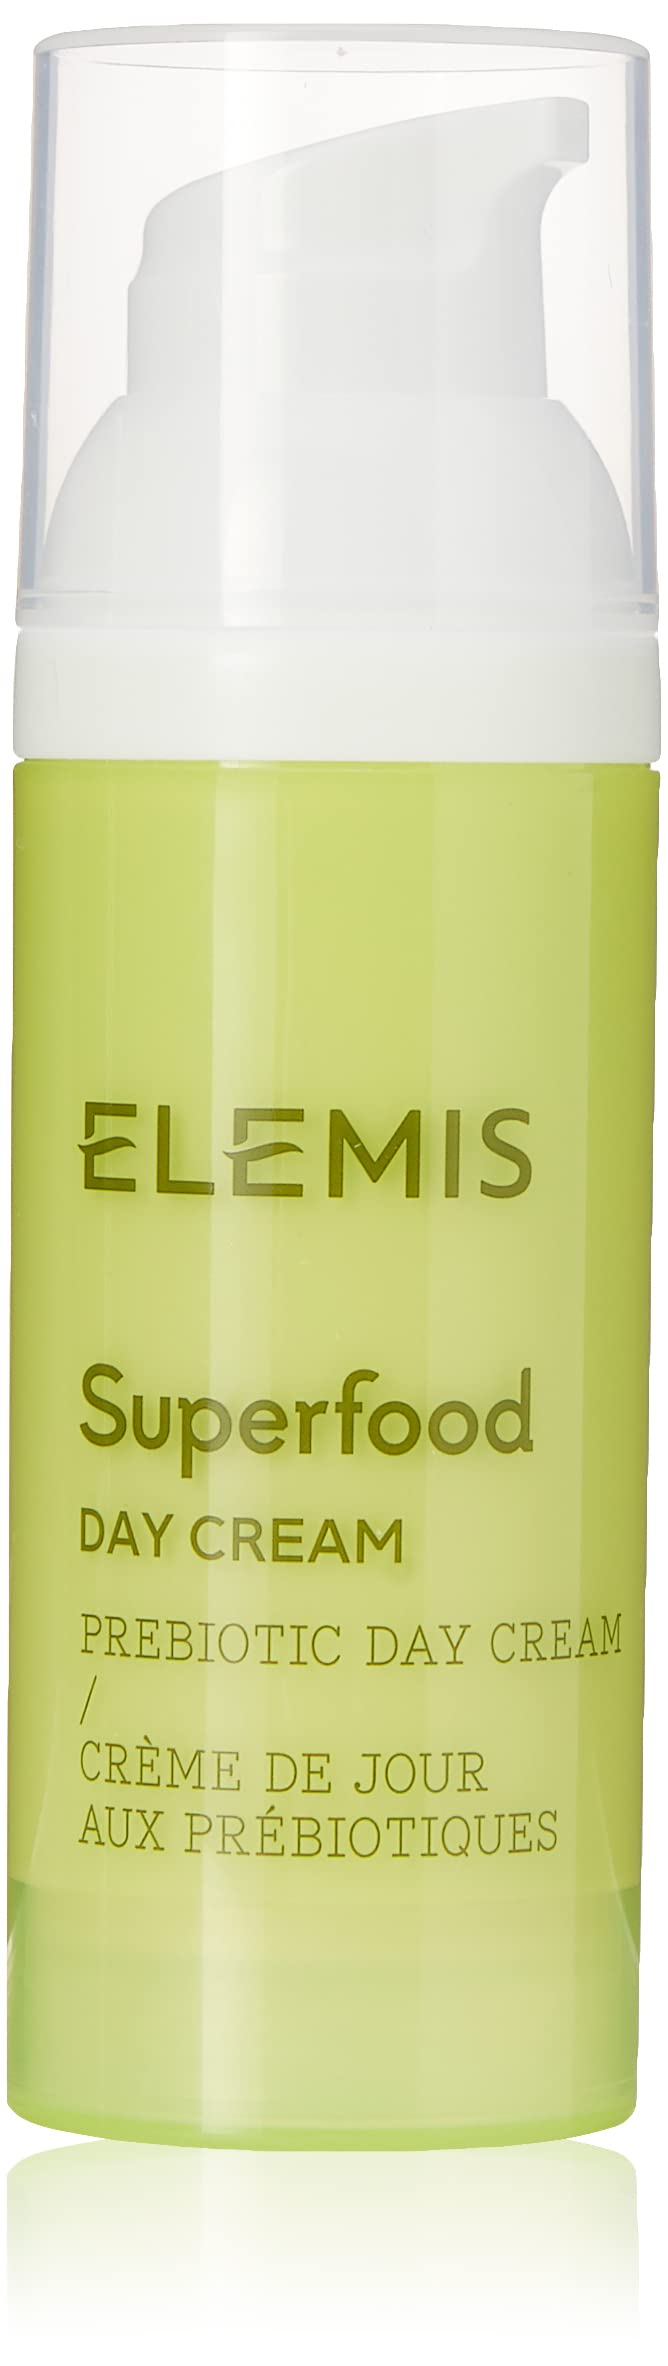 ELEMIS Superfood Day Cream | Vitamin-Rich Lightweight Prebiotic Daily Moisturizer Replenishes, Hydrates and Protects for Radiant, Healthy Skin | 50 mL